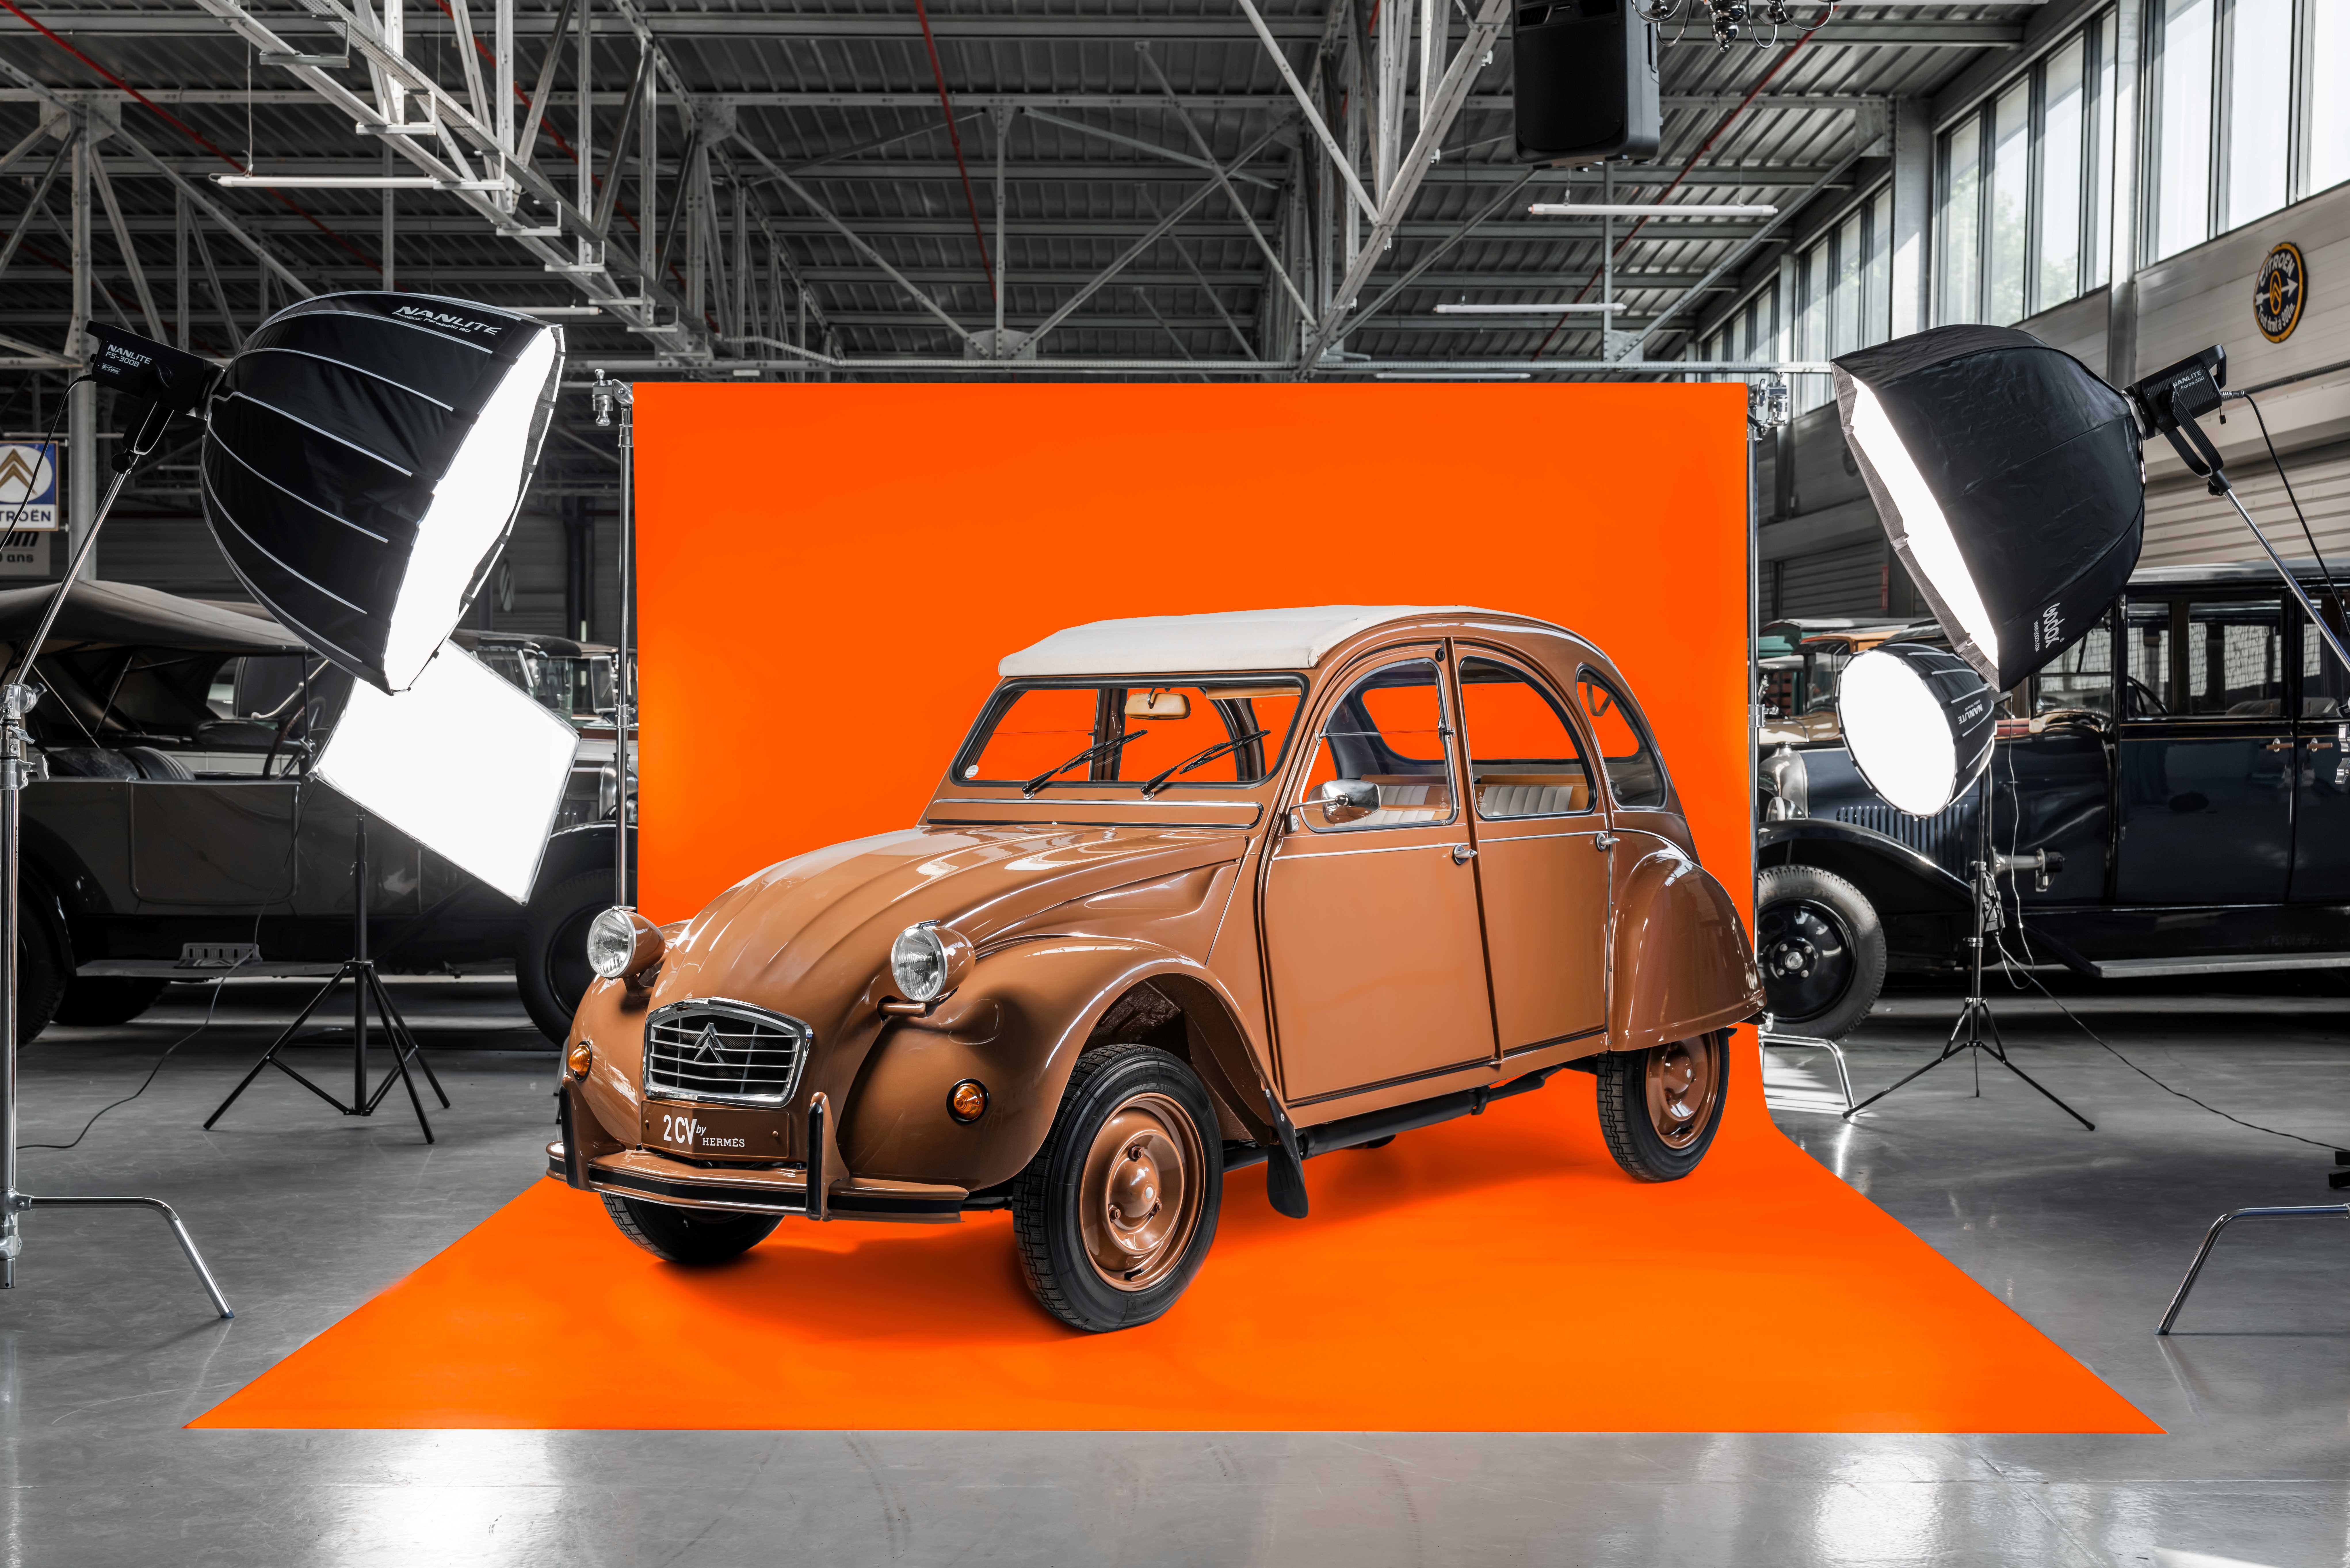 A shot of the Citroen 2CV 6 by Hermes, photographed at the Citroen Conservatoire.